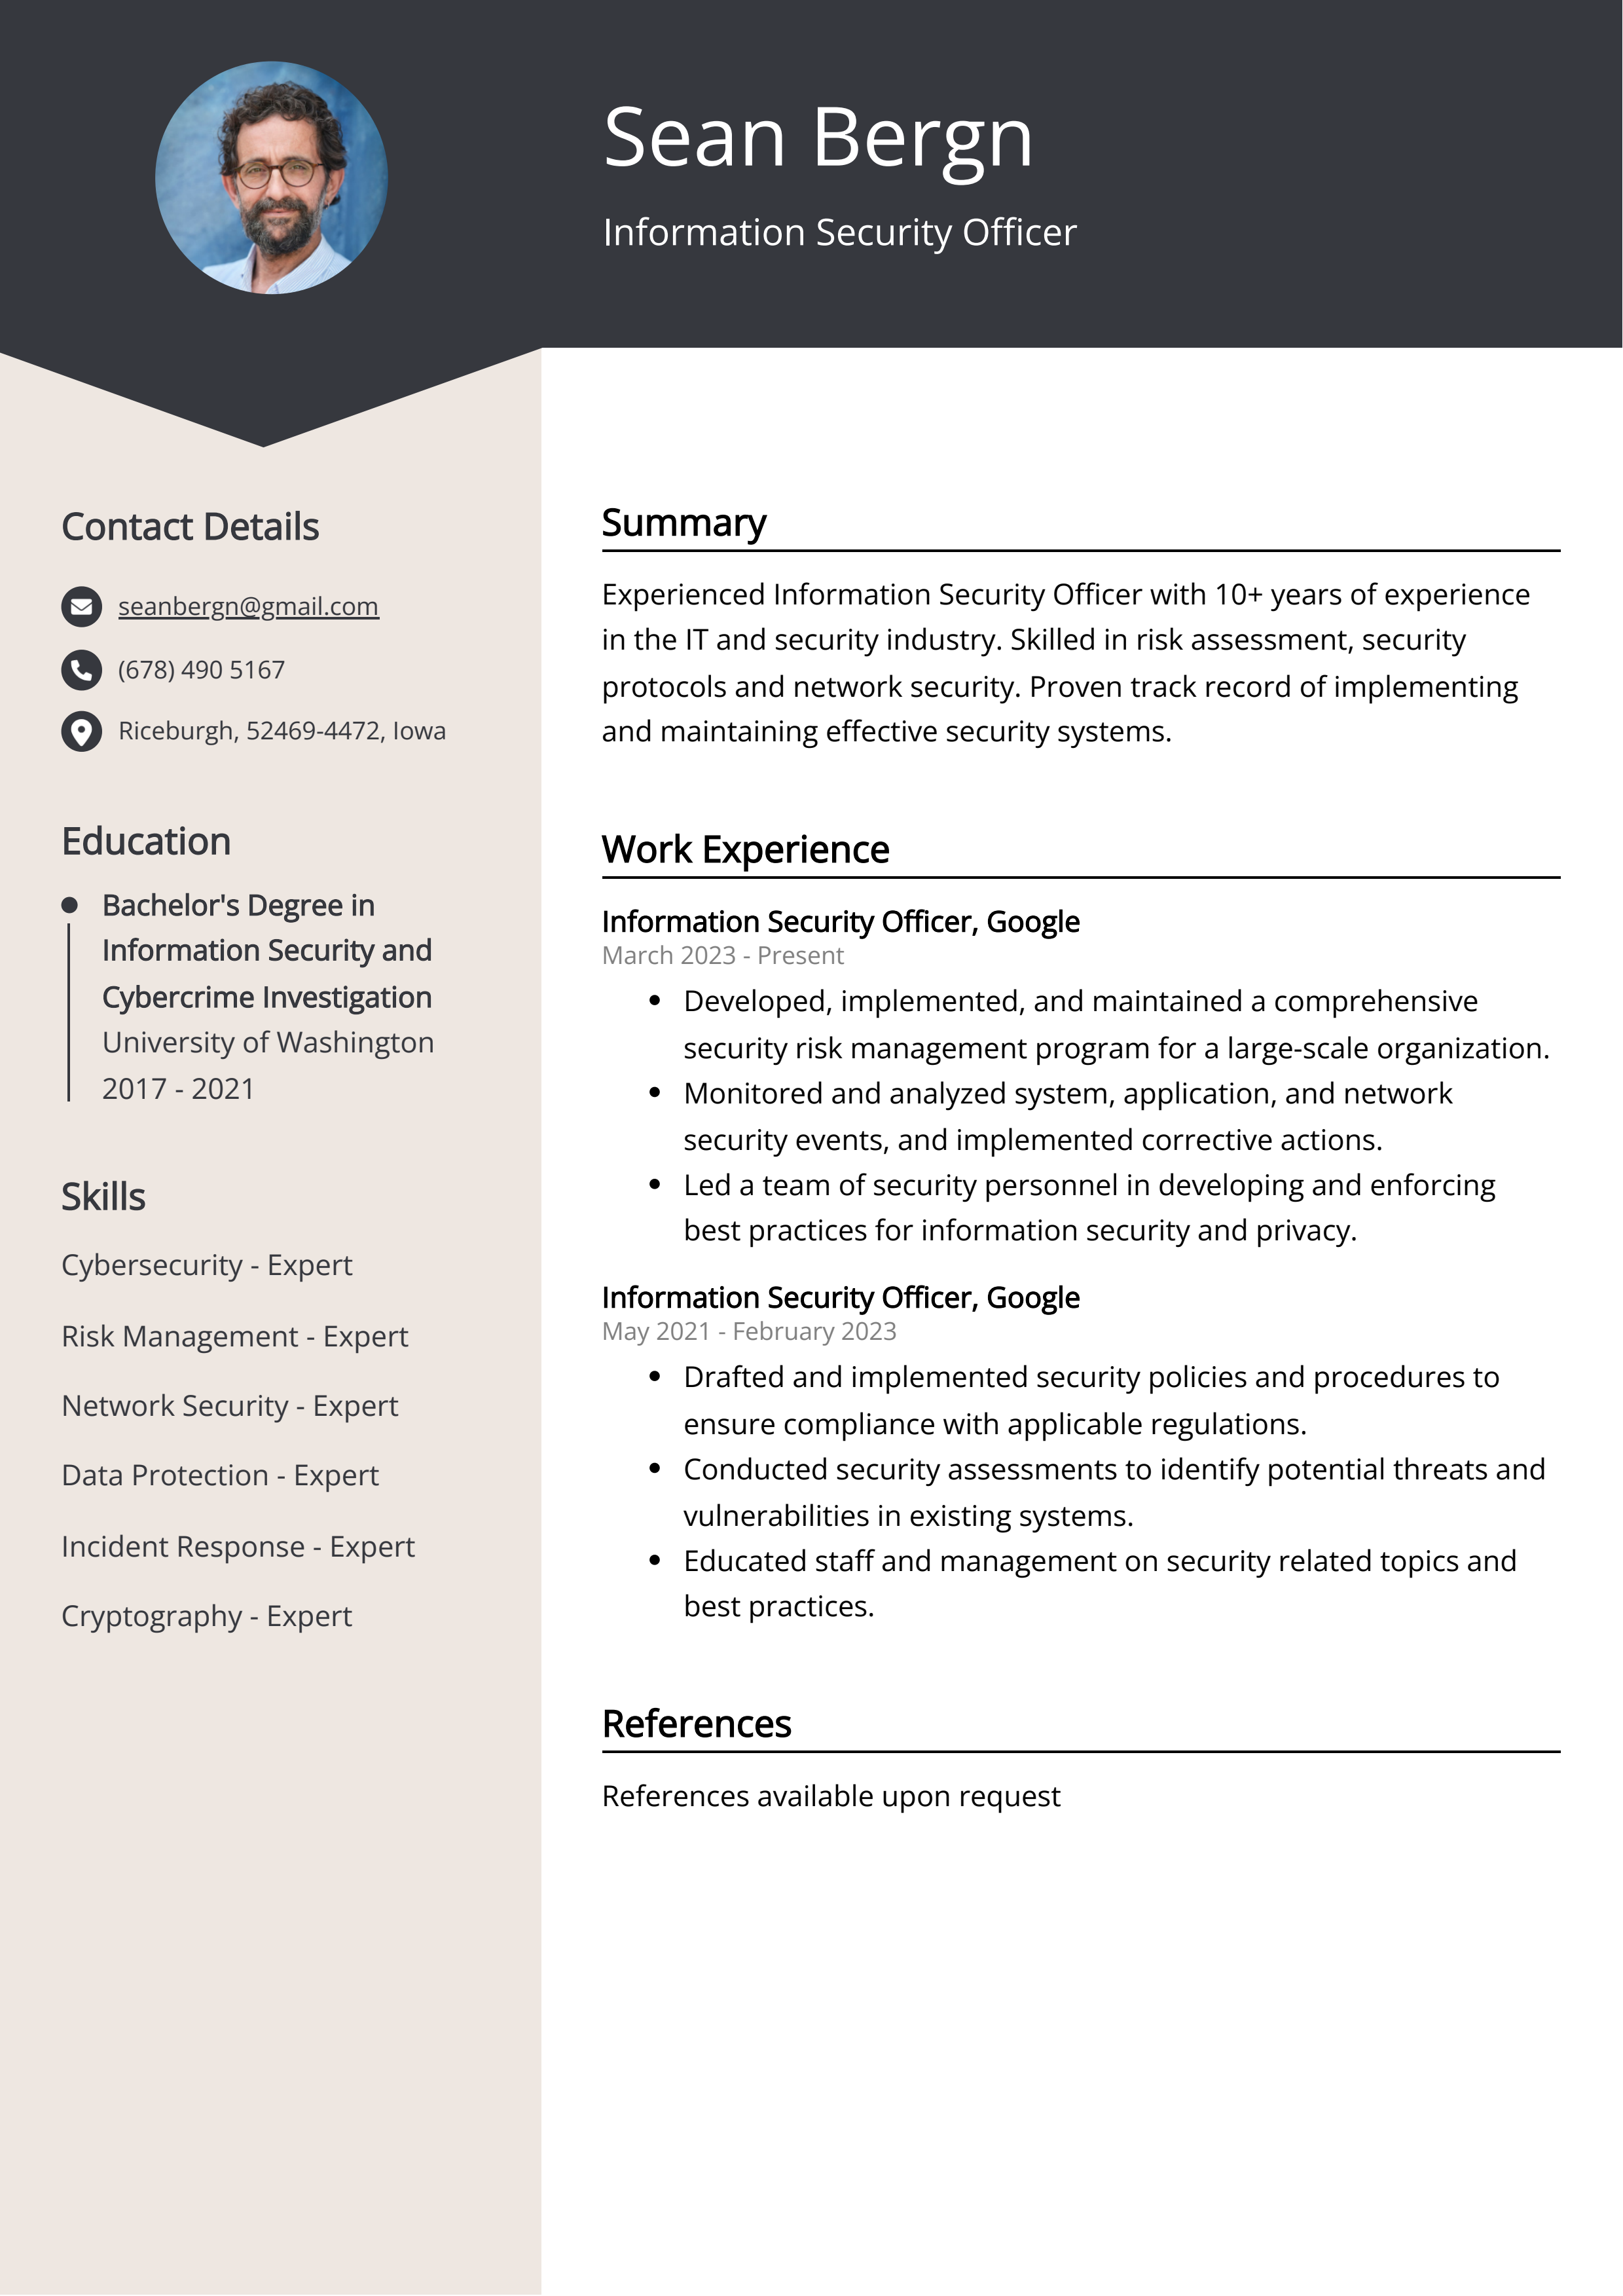 Information Security Officer CV Example